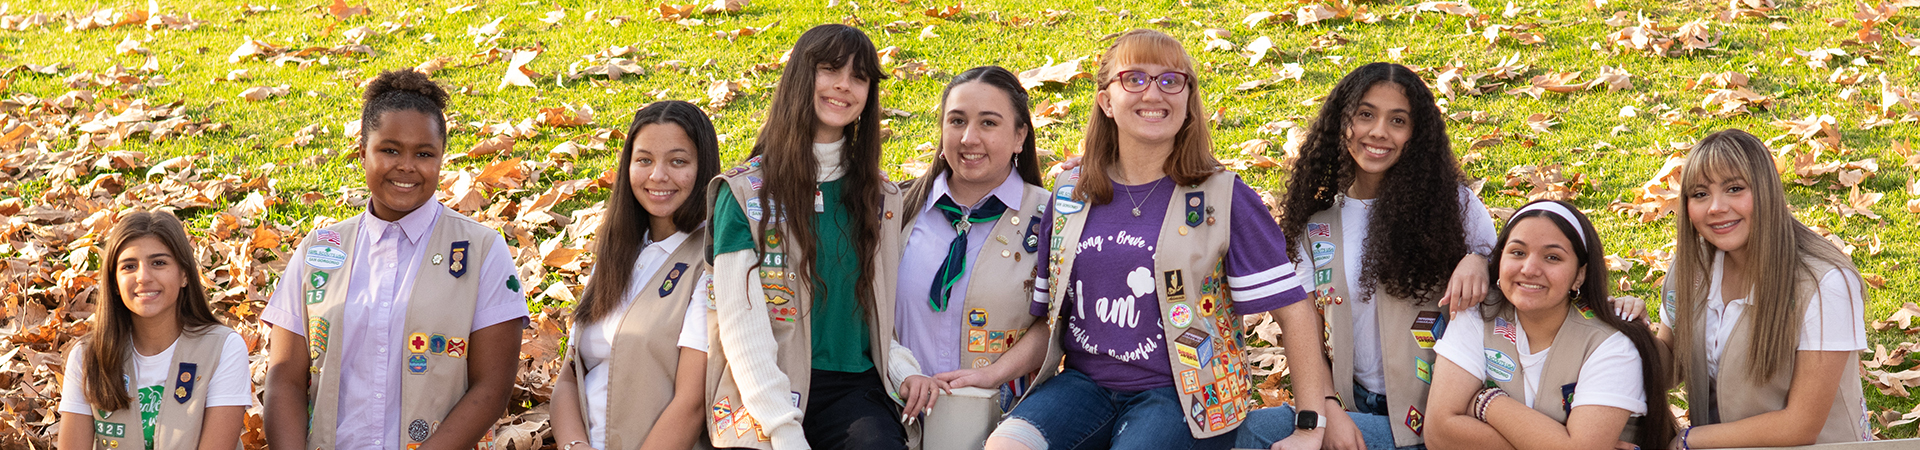  photograph of 9 older Girl Scouts smiling in front of a grassy hillside with fall leaves 